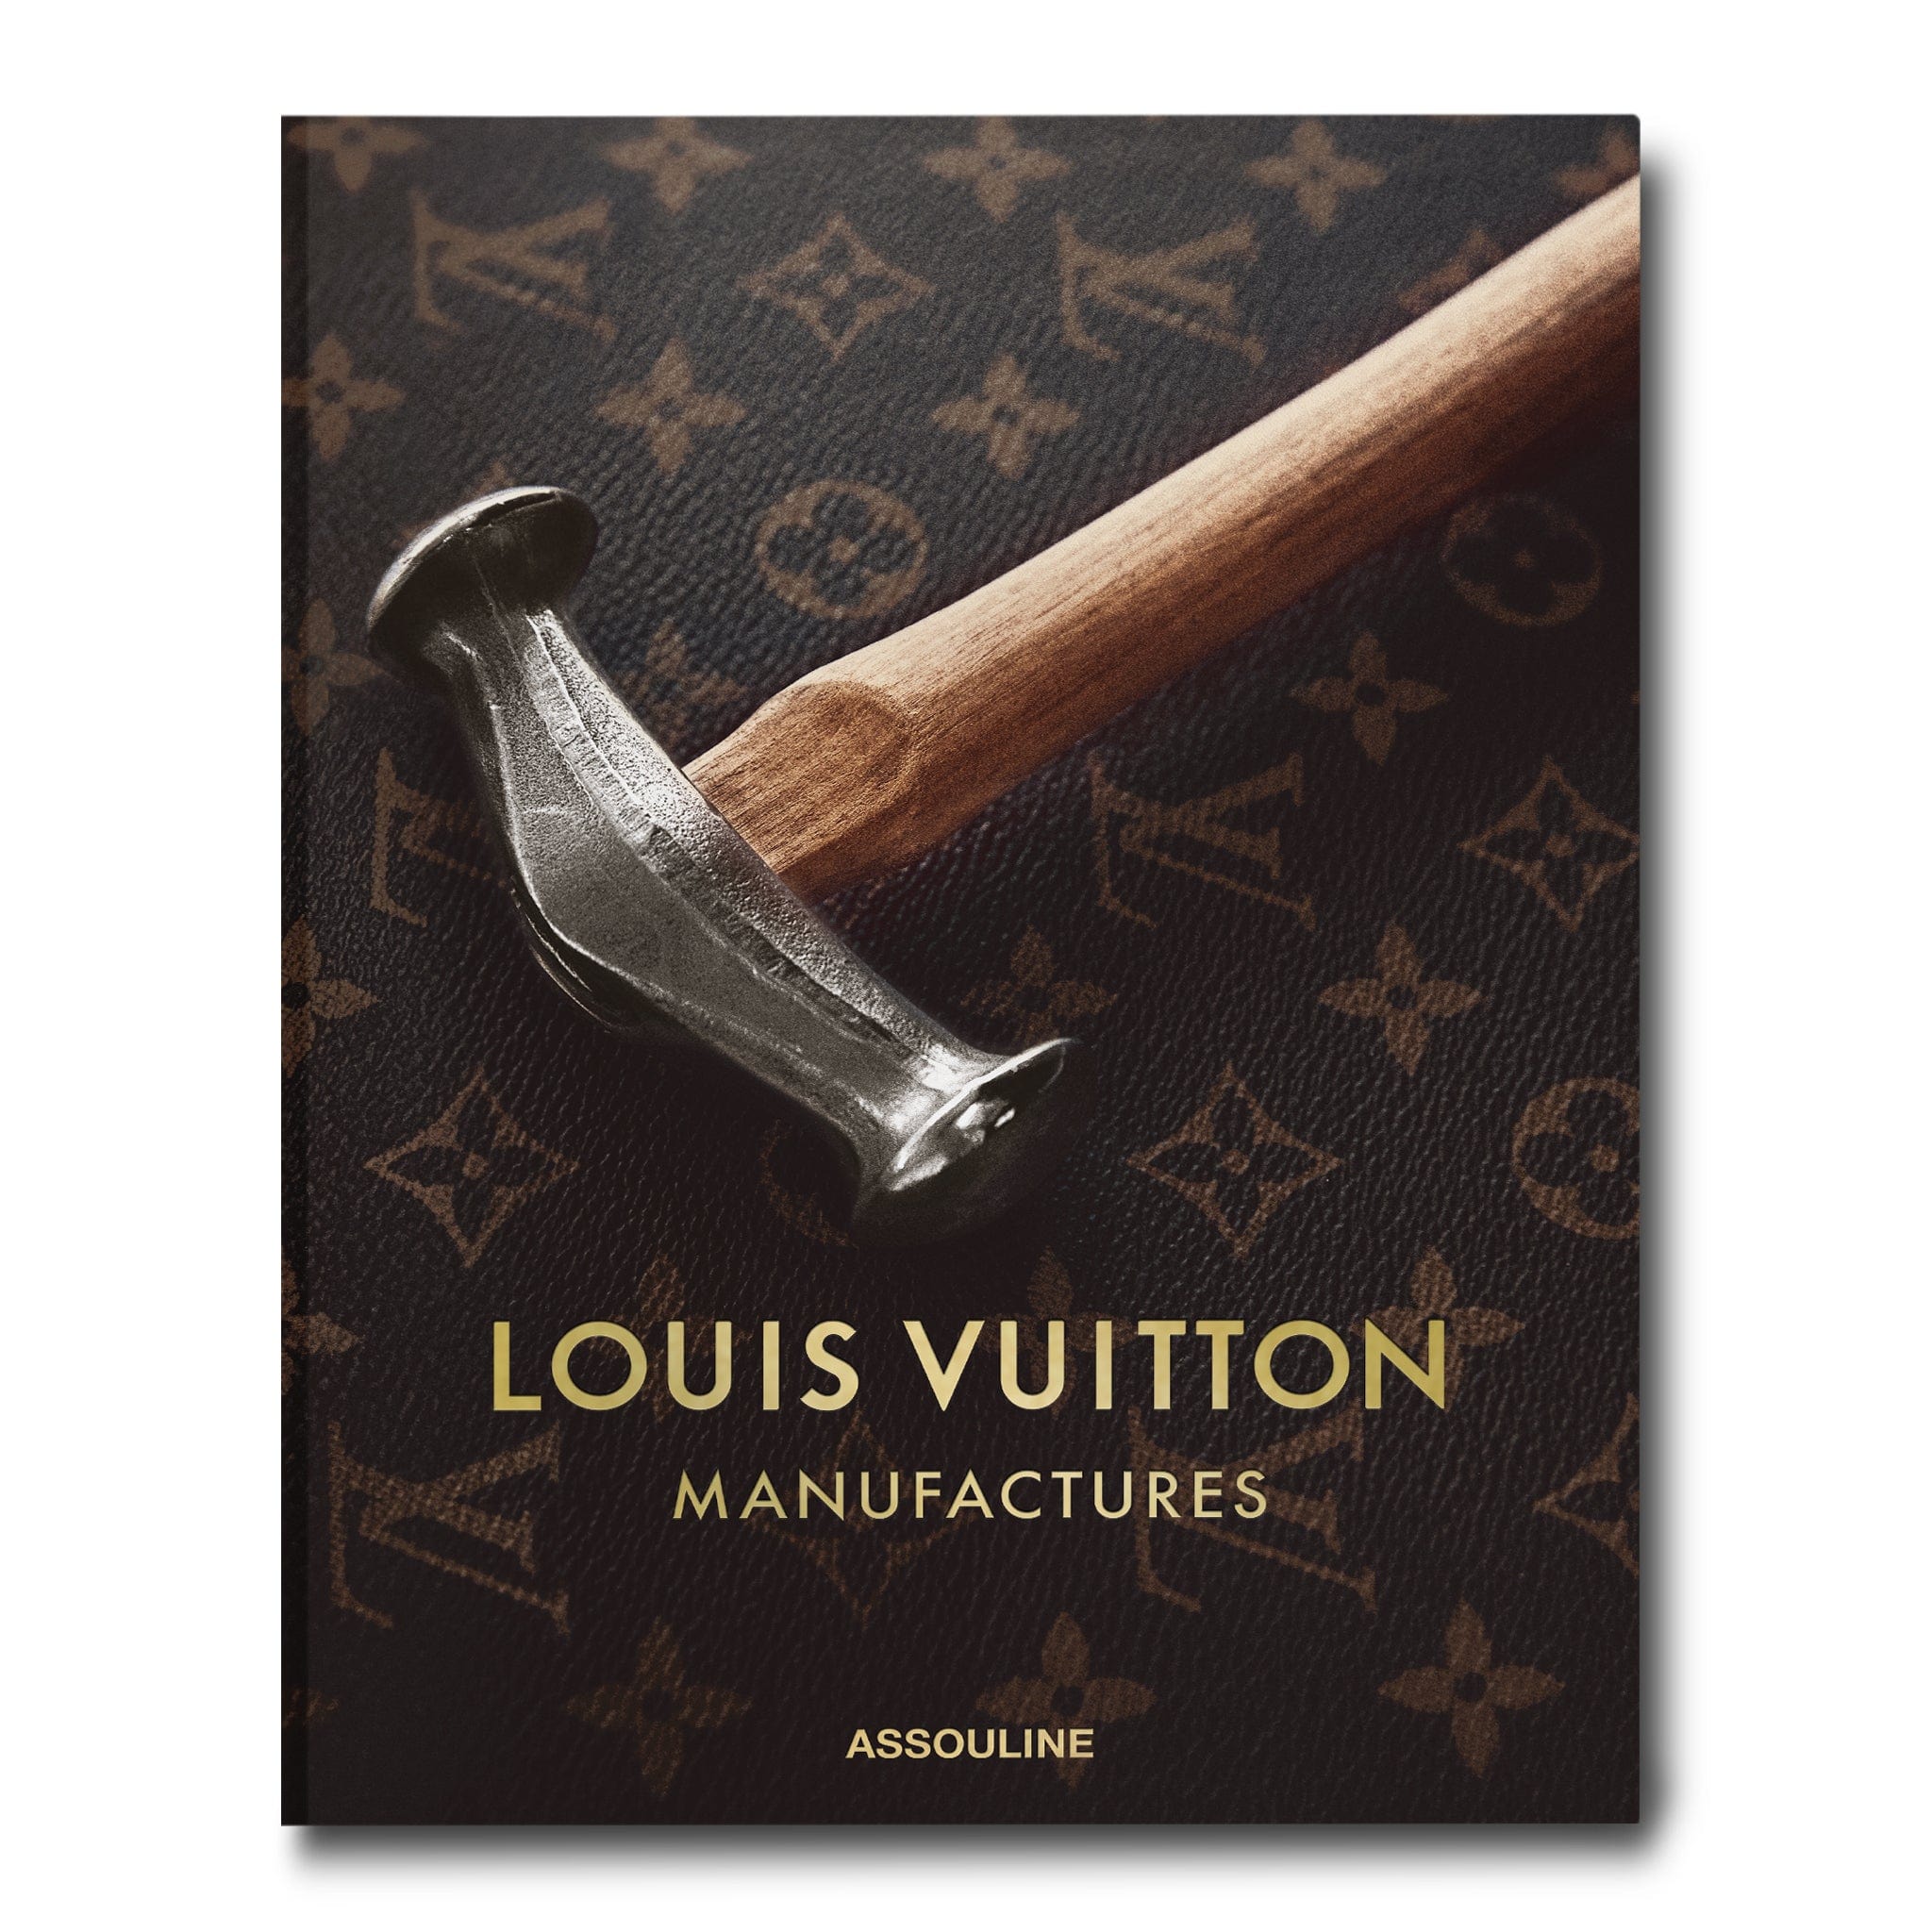 Louis Vuitton Virgil Abloh Cartoon Cover Coffee Table Book Limited Edition  🚚✓ 9781649801524